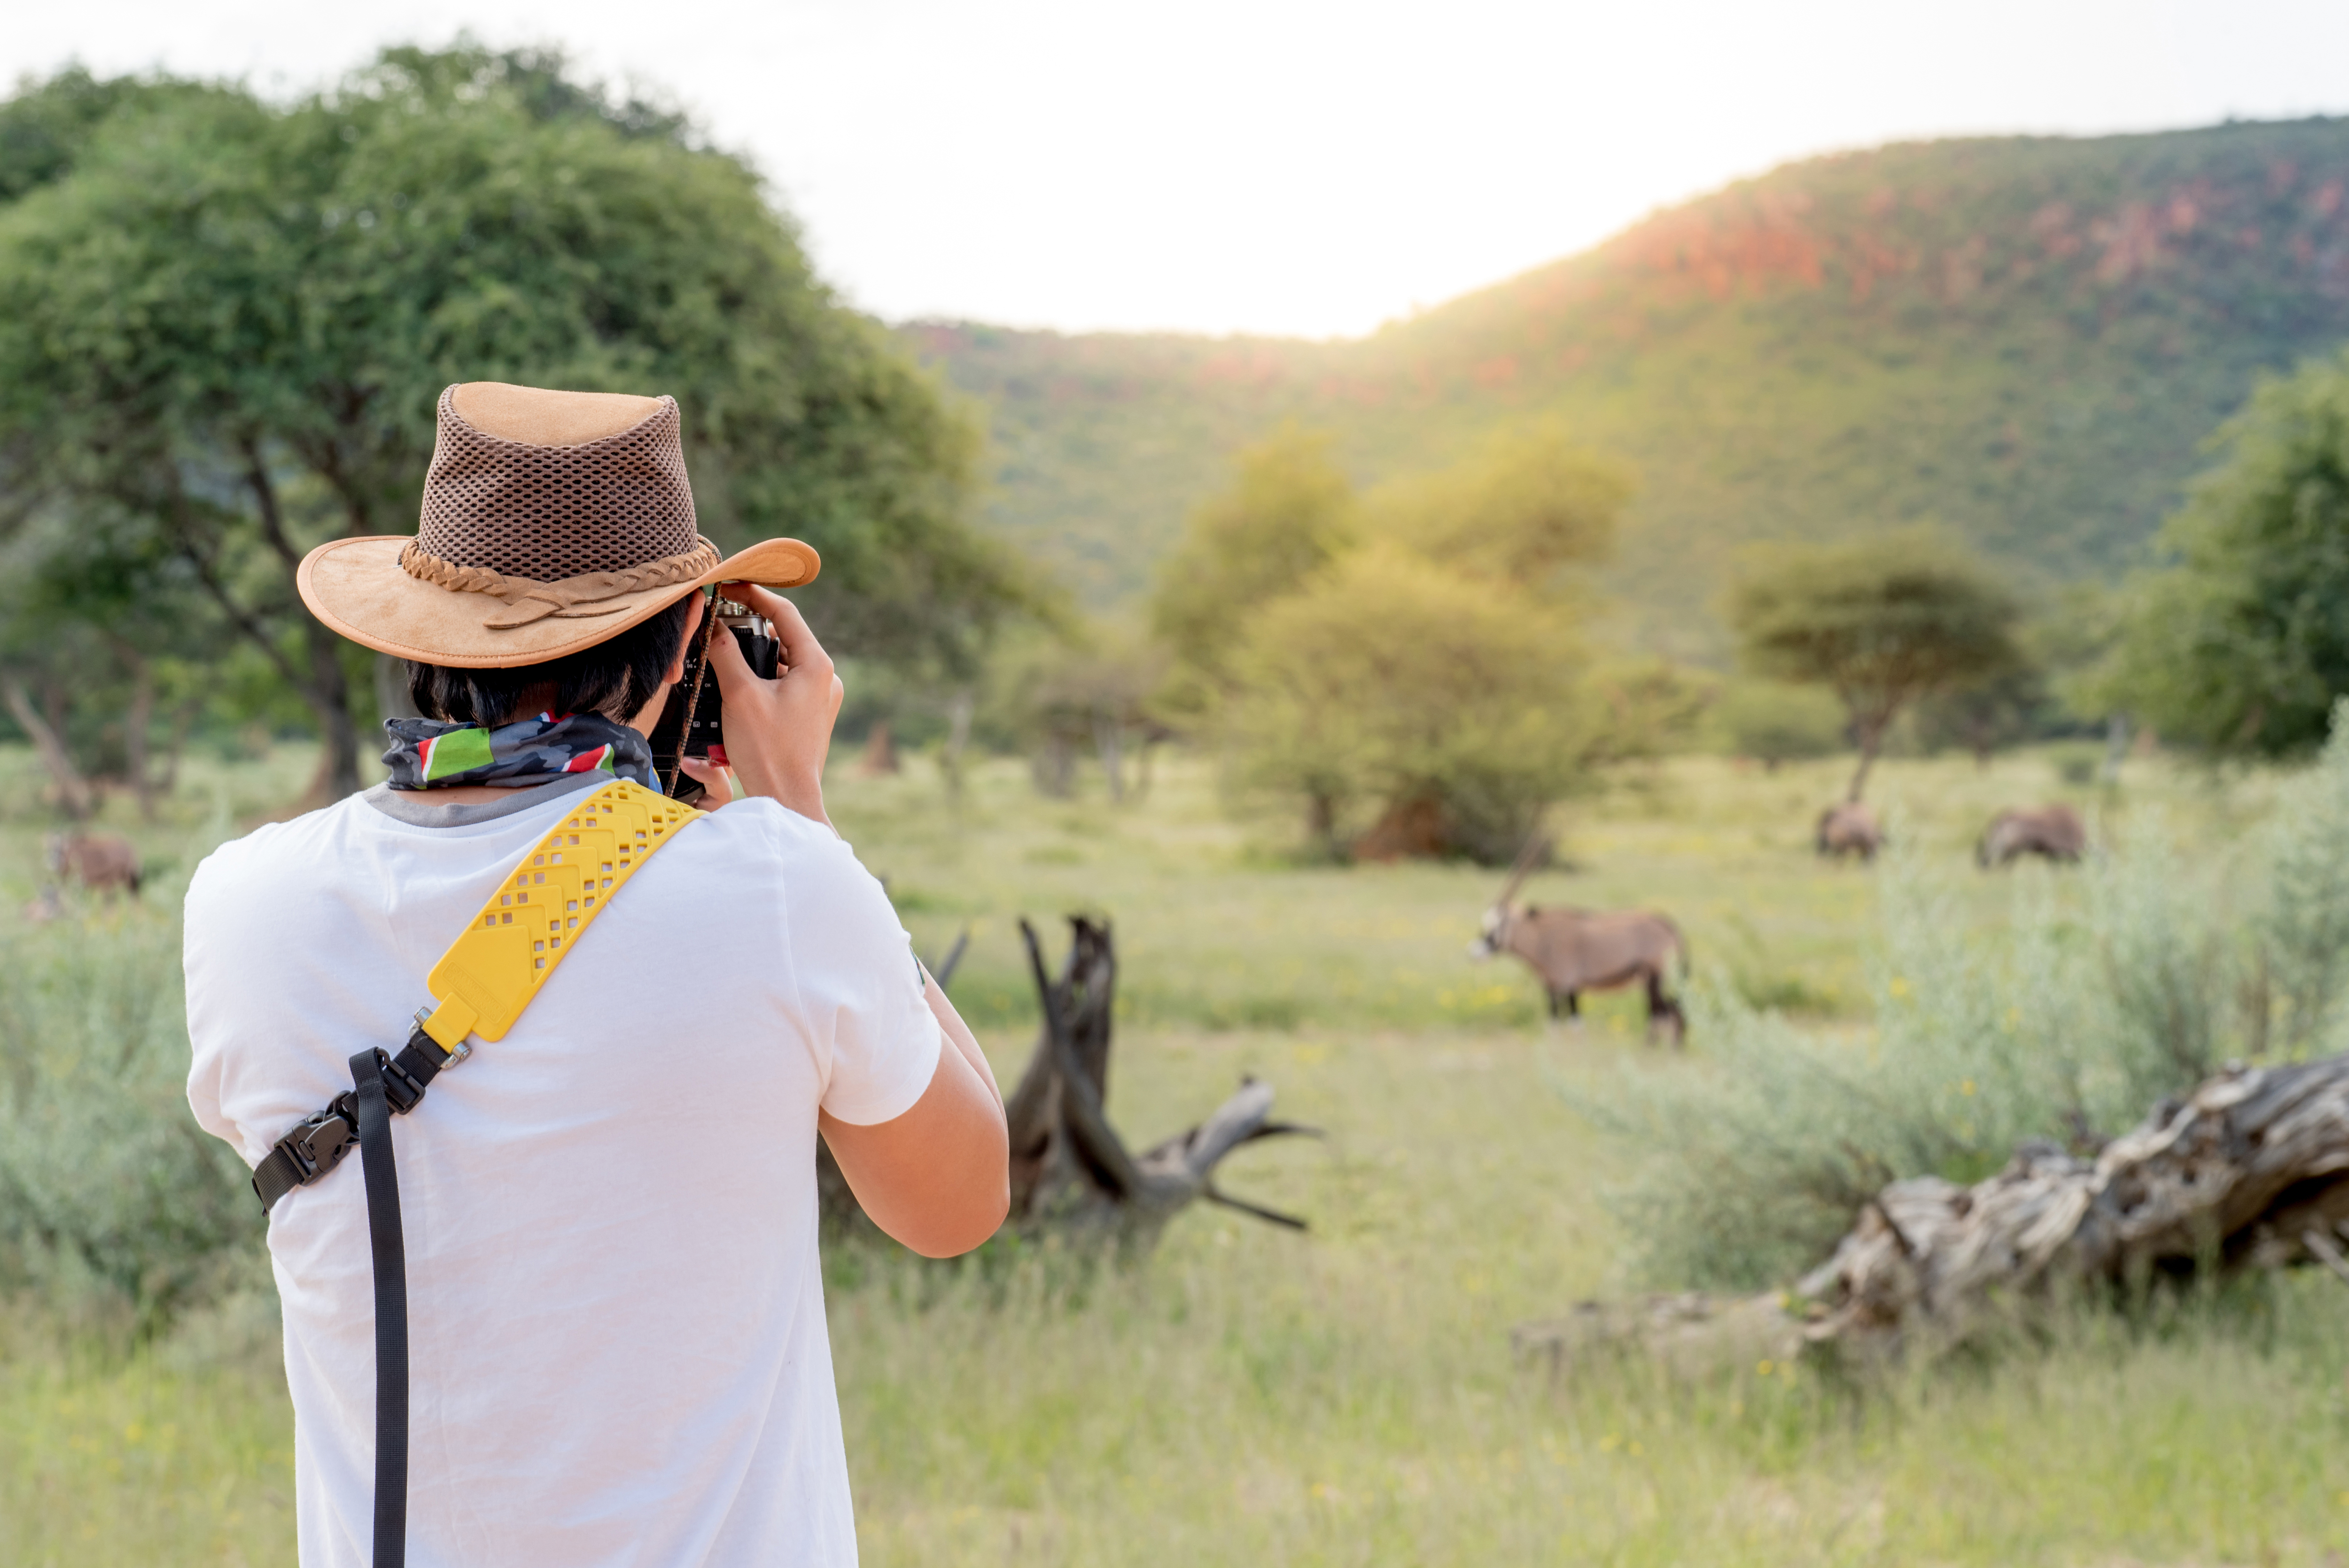 Young man traveler and photographer taking photo of Oryx, a type of wildlife animal in African safari. Wildlife photography concept